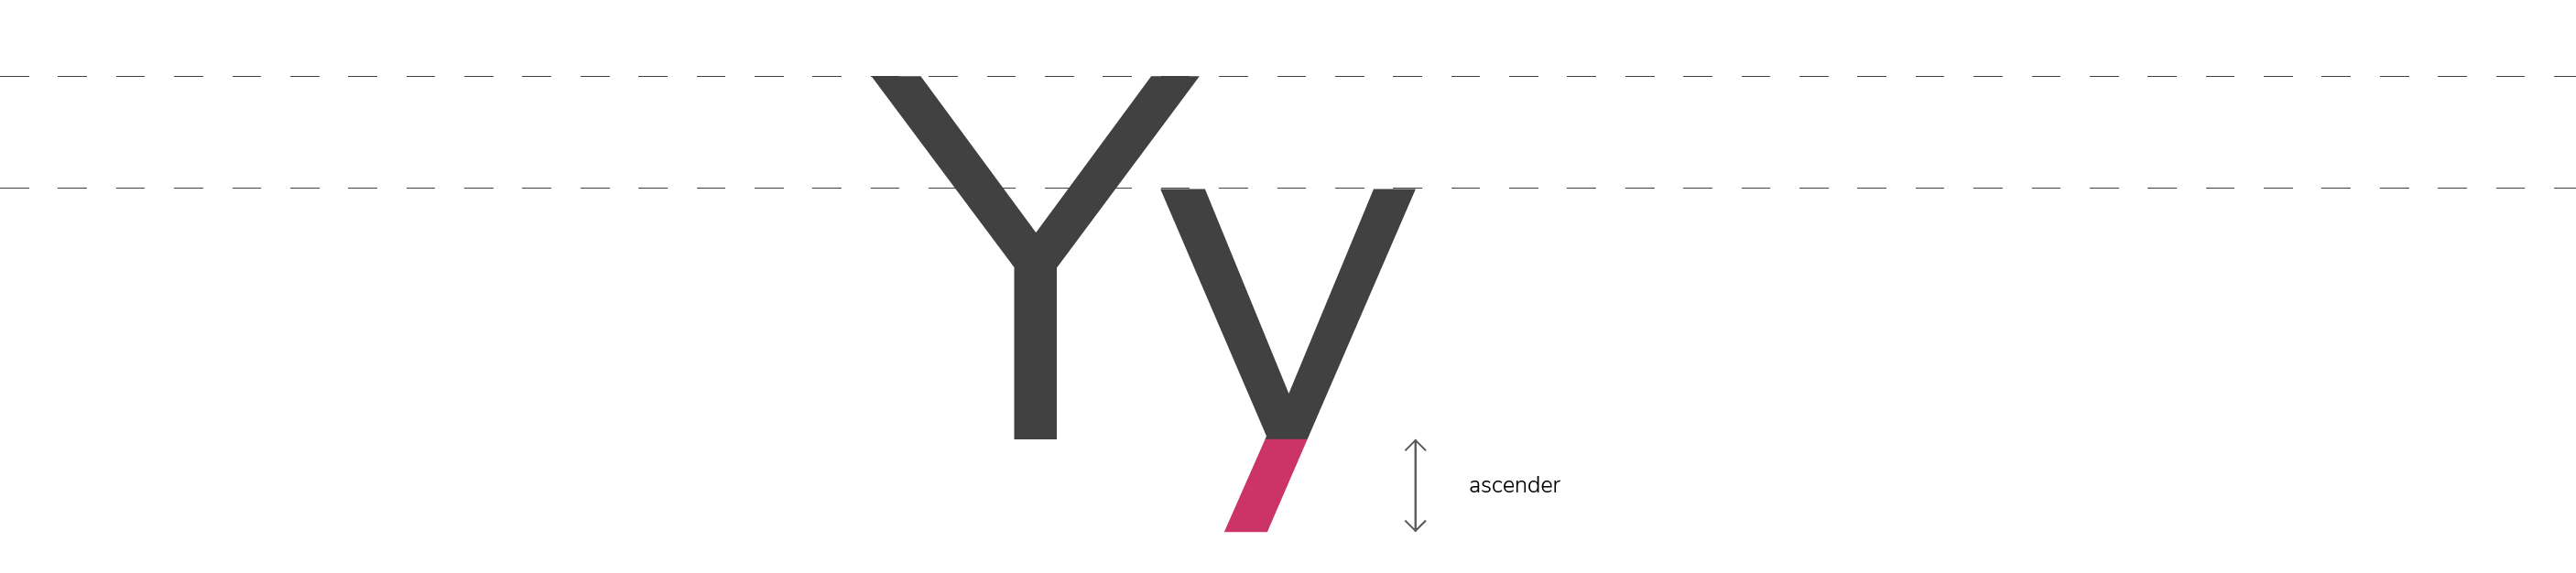 Descenders are the parts of a letter that extend below the letter's x-height